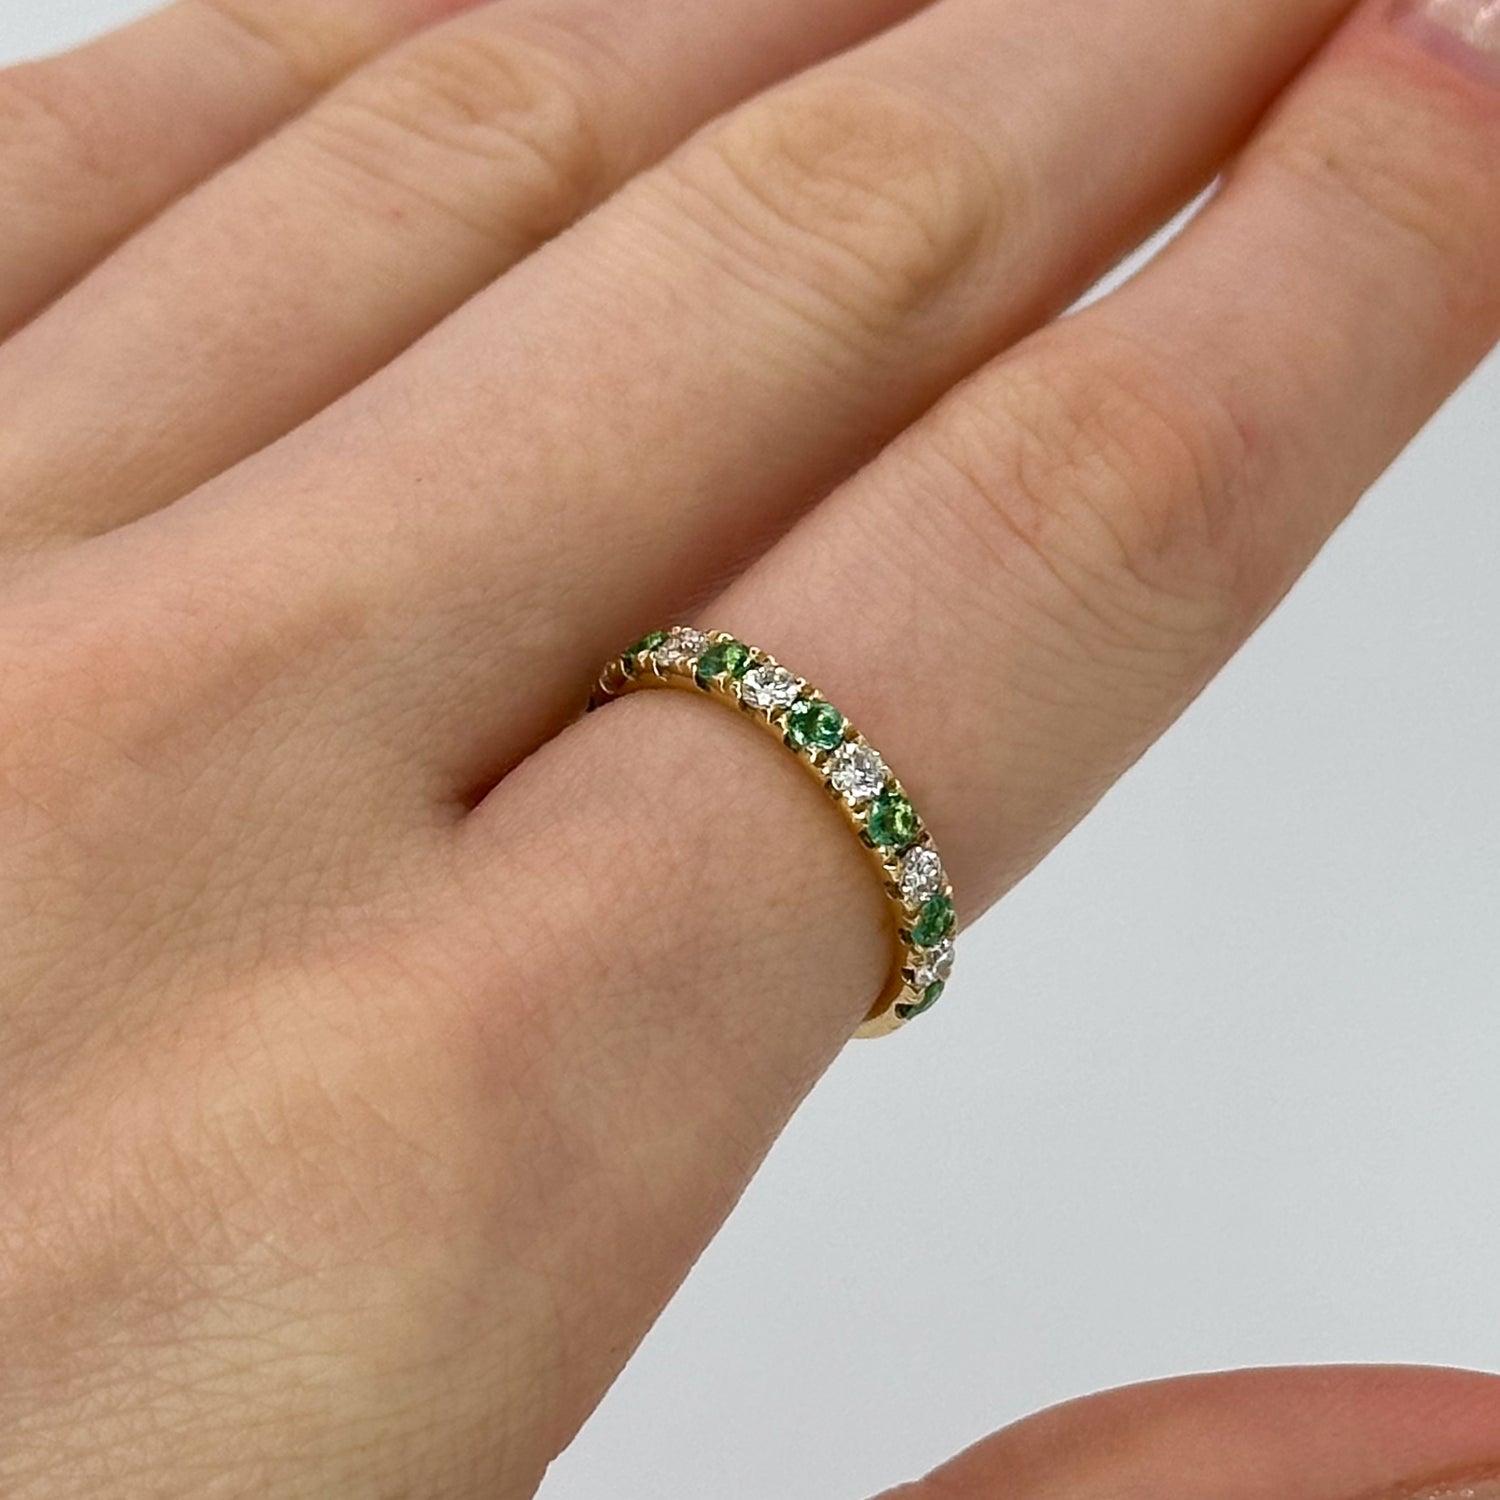 Diamond and Emerald Eternity Ring in Yellow Gold